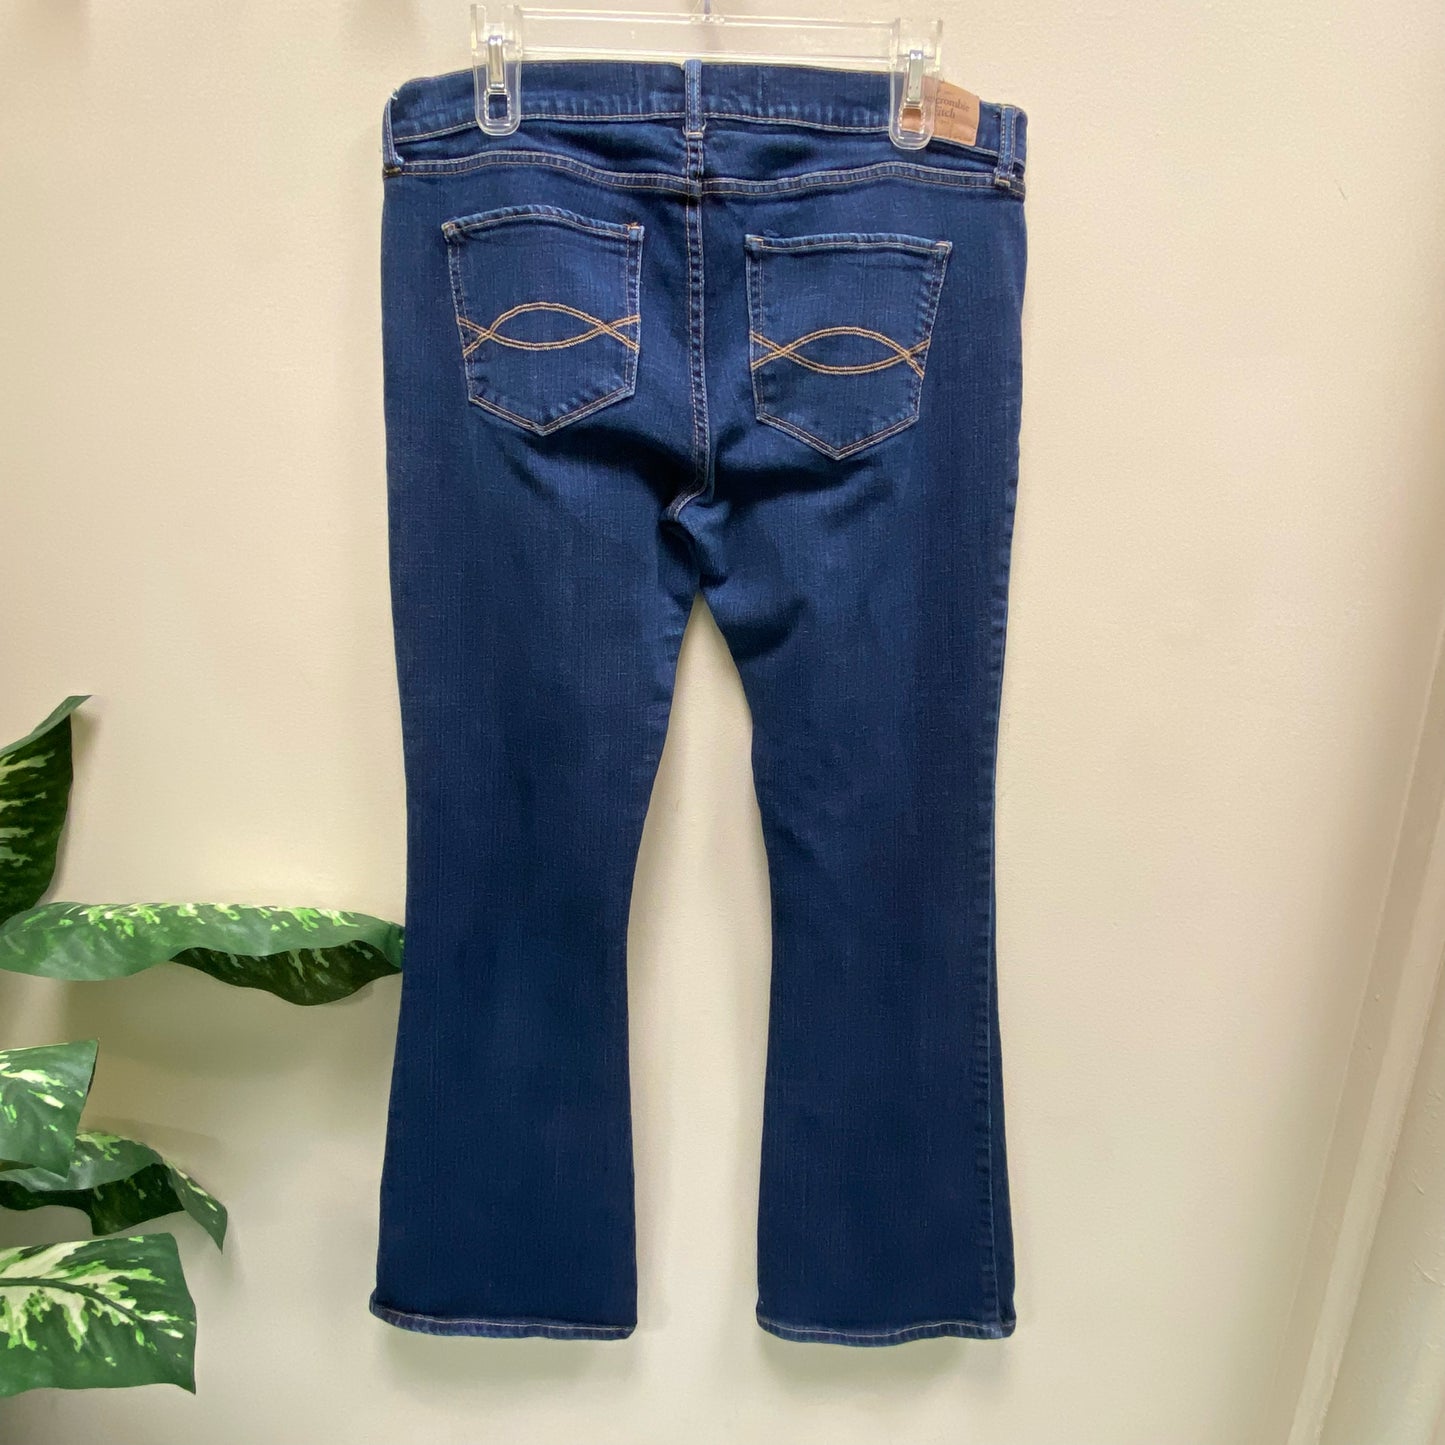 Abercrombie & Fitch "Madison" Jeans - Size 12